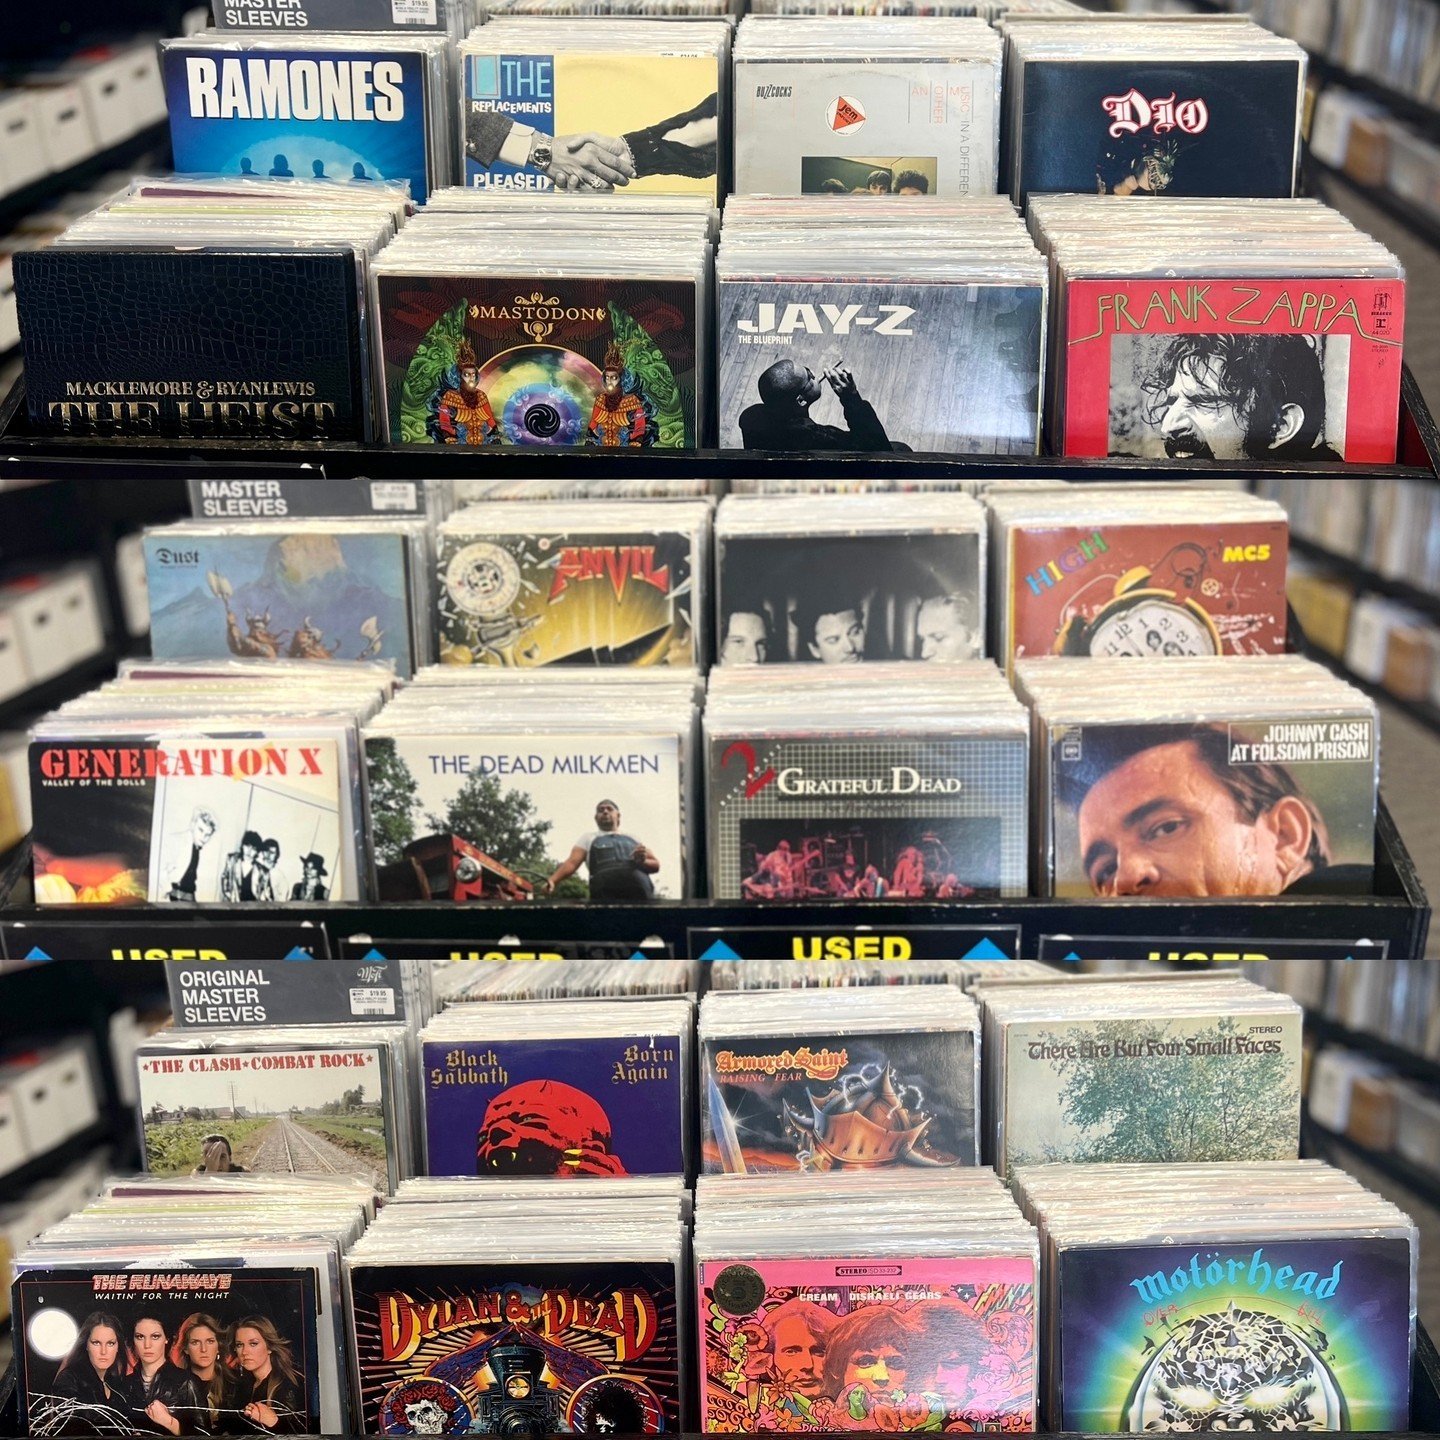 We have a lot of great stuff going out in the racks for Memorial Day Weekend!  Here are some of the highlights hitting the bins Saturday!  Ramones, The Replacements, Buzzcocks, Dio, Macklemore and Ryan Lewis, Mastadon, Jay-Z, Frank Zappa, Dust, Anvil